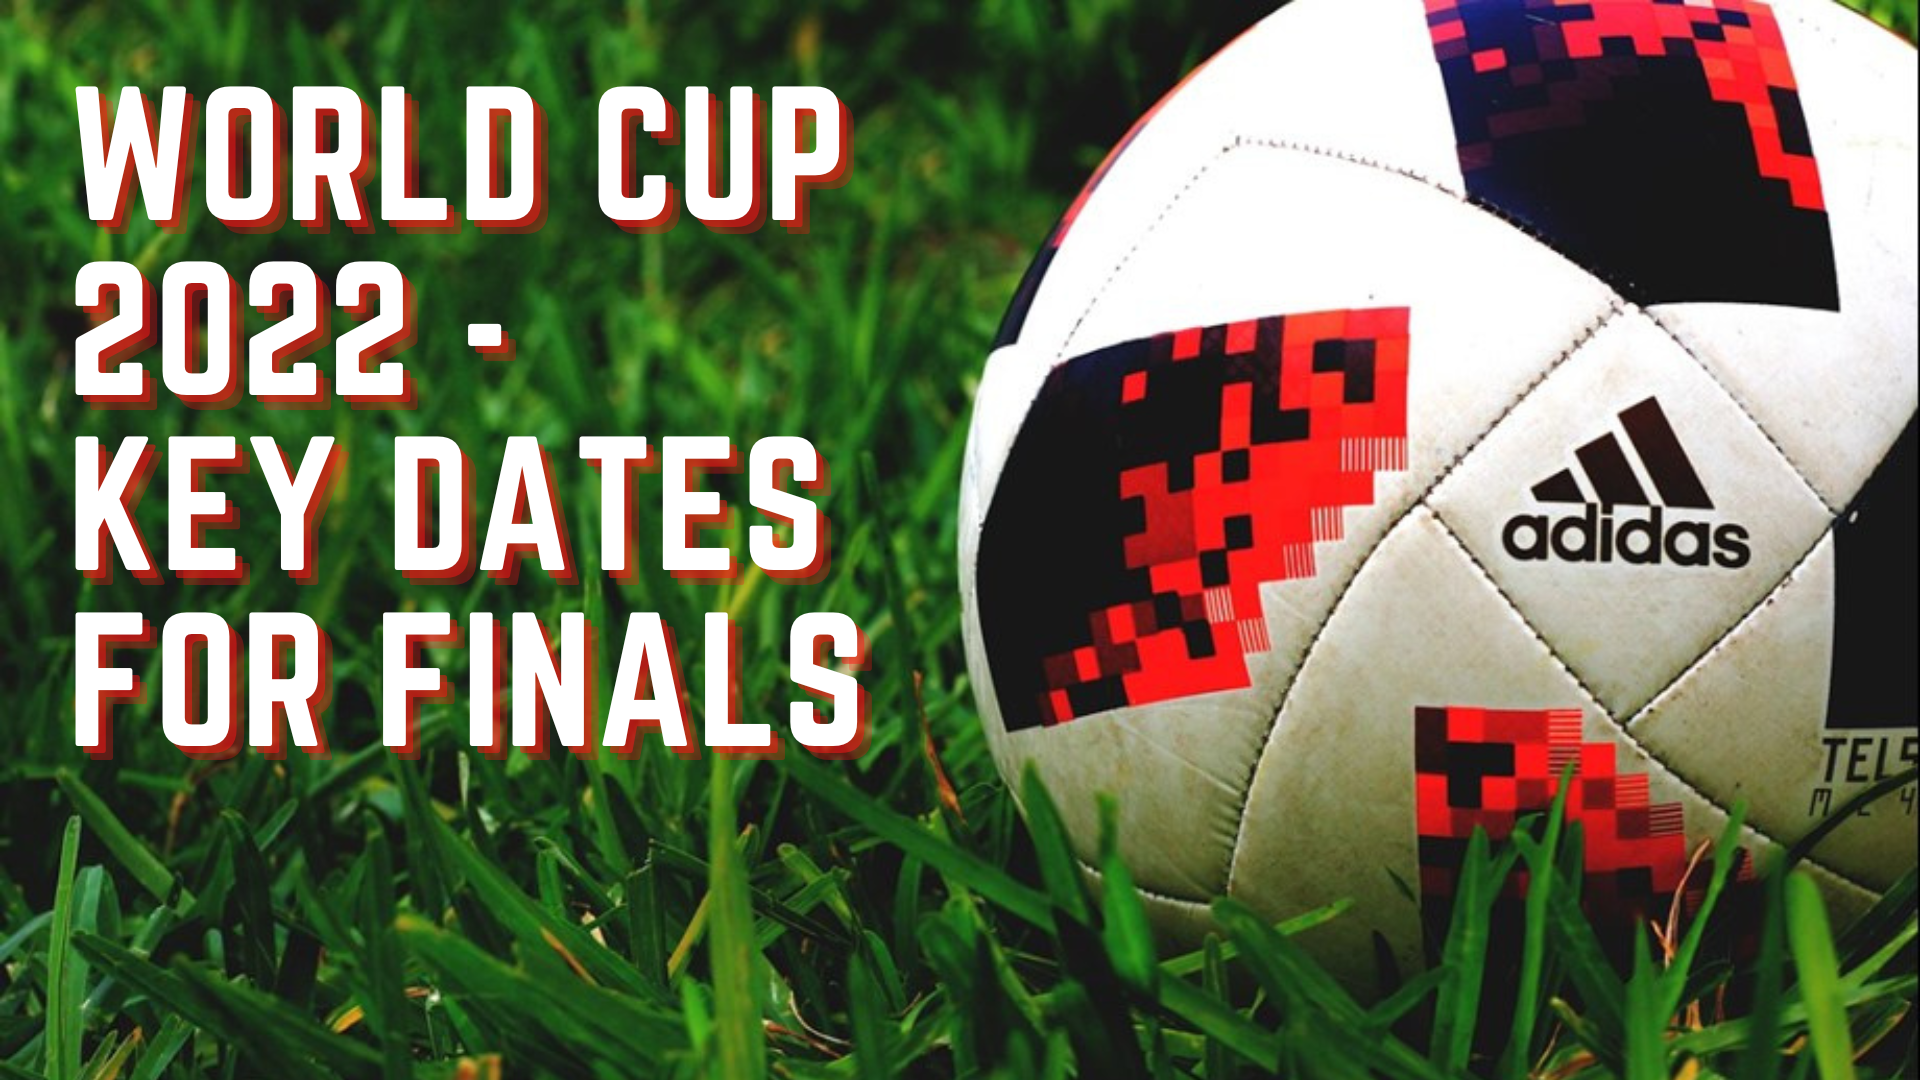 A ball in the grass with words World Cup 2022 Key dates for finals